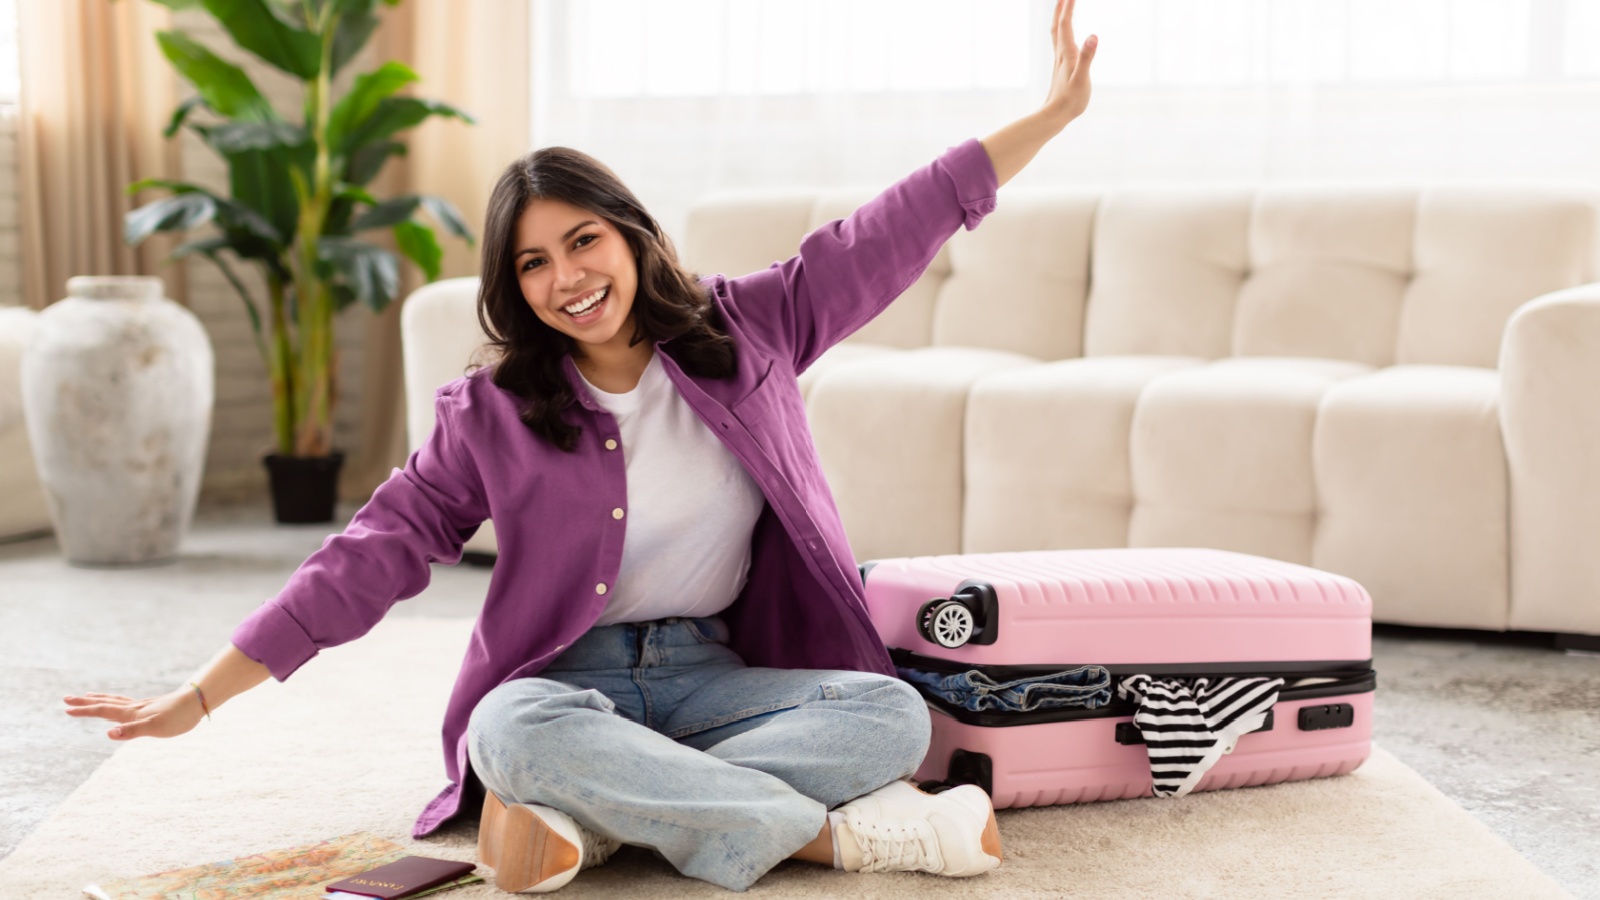 A joyous middle eastern woman with arms wide open sitting on the floor next to a pink suitcase, expressing travel excitement